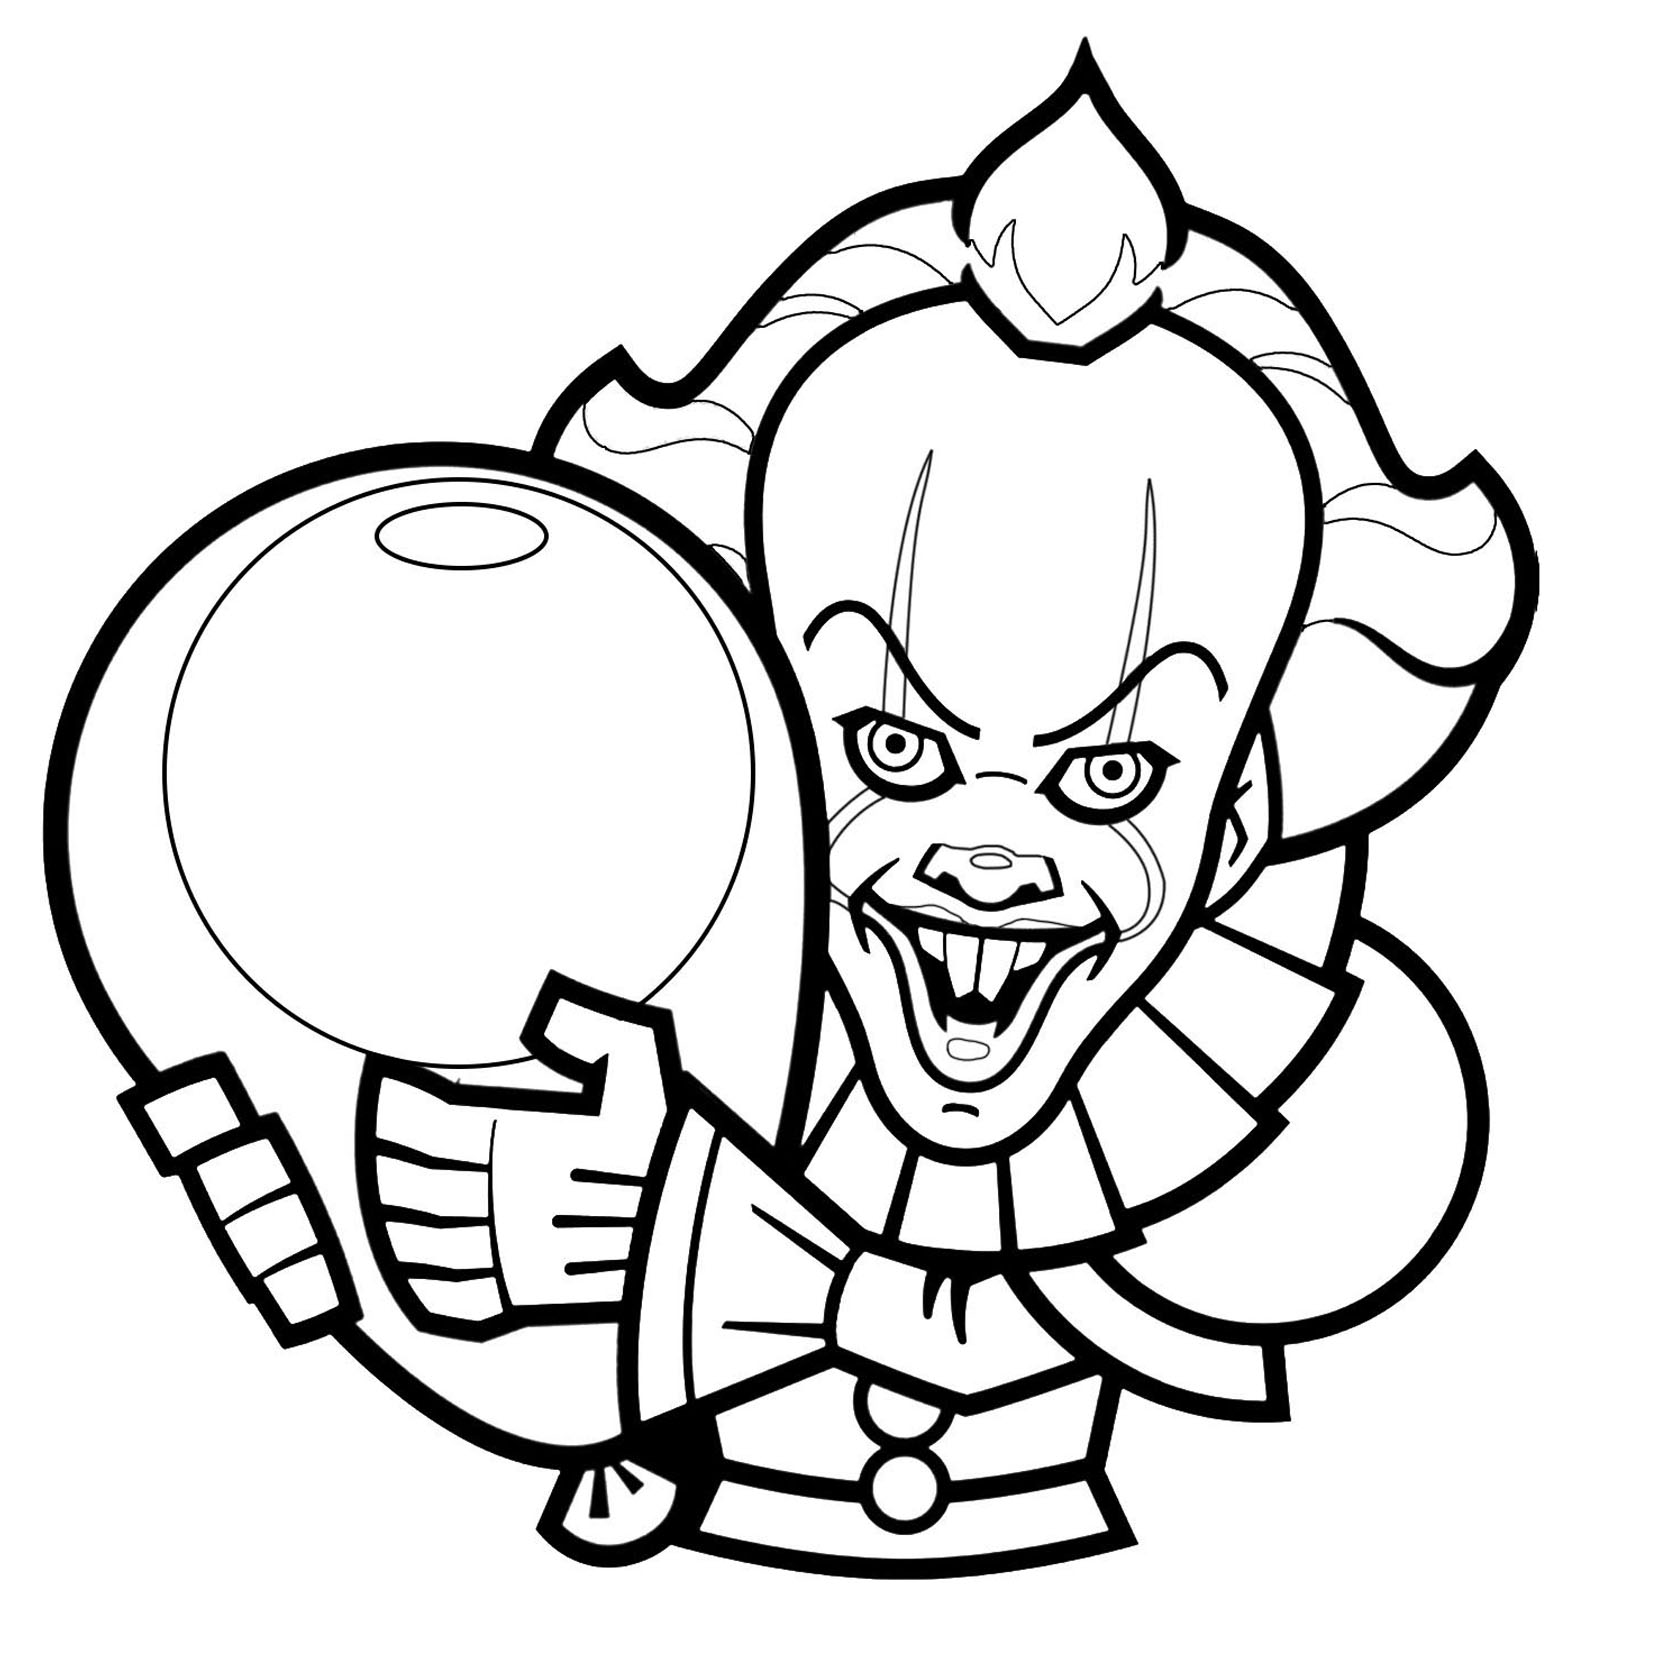 Hallowen Coloring Pages